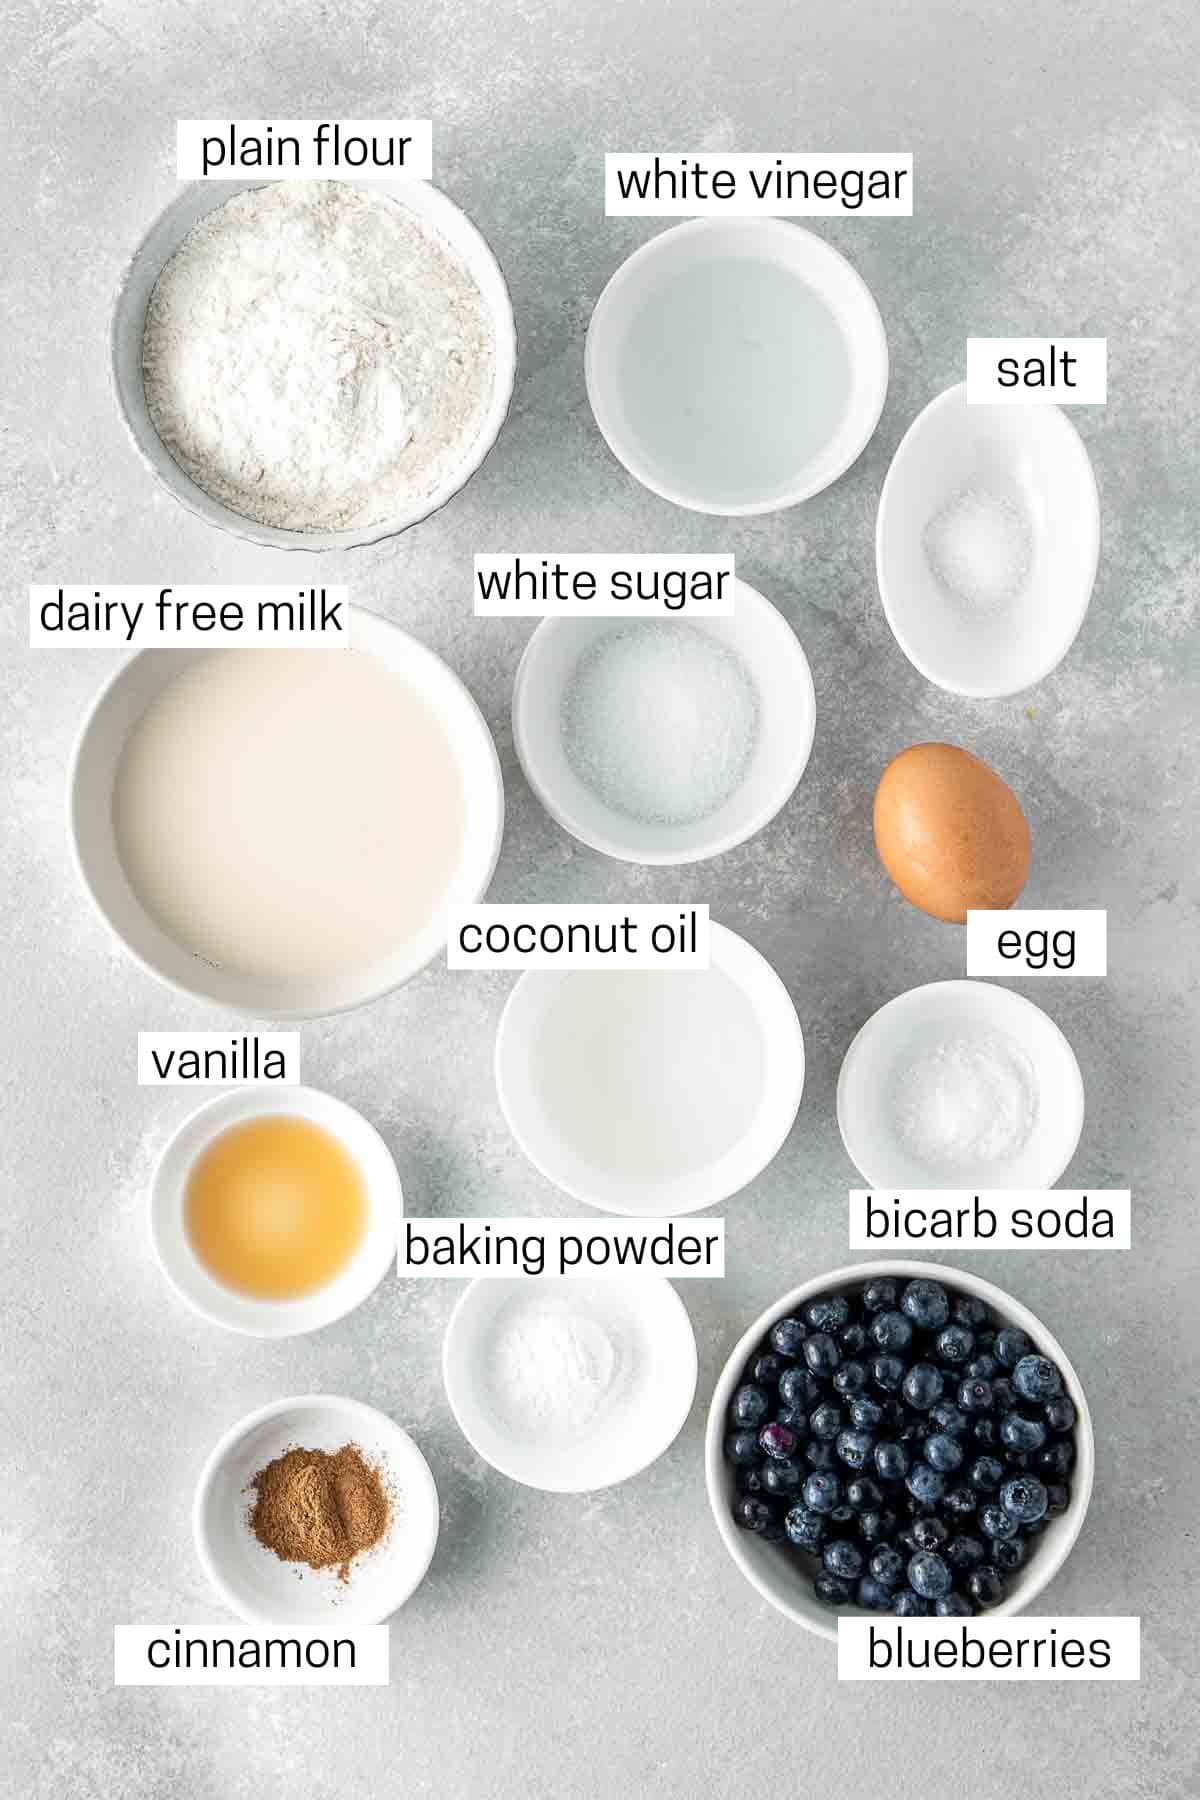 All ingredients needed to make dairy free blueberry buttermilk pancakes laid out in small bowls.